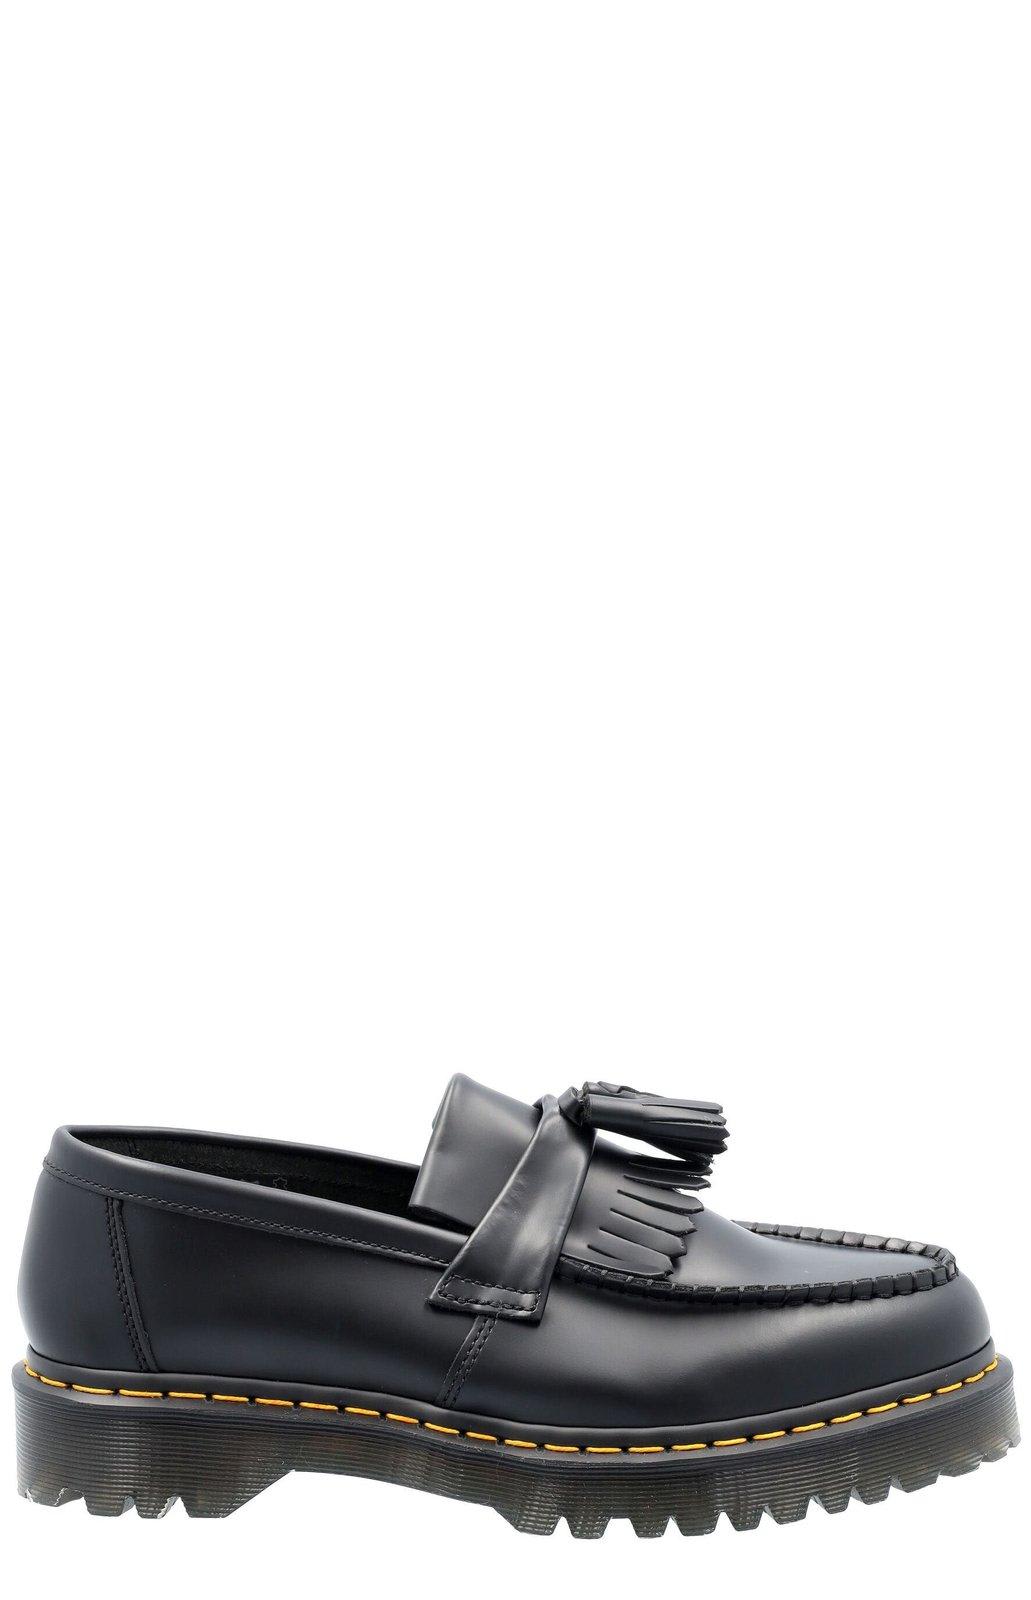 Dr. Martens Adrian Bex Loafers